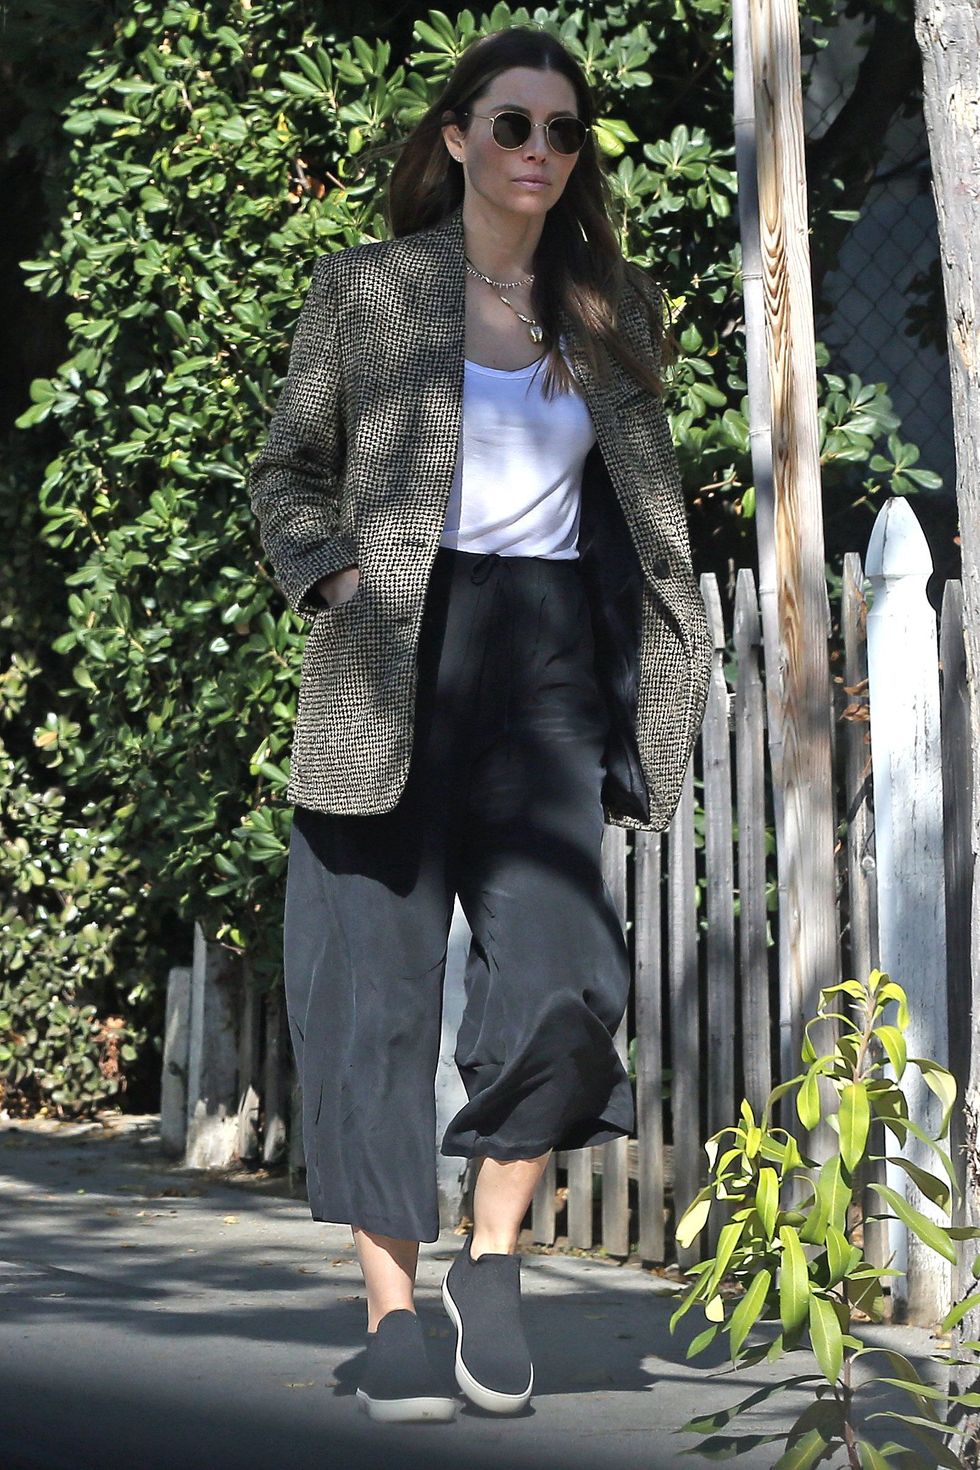 Jessica Biel seen out in Los Angeles, jessica appears to be carrying a Transformer and a Pillow!!